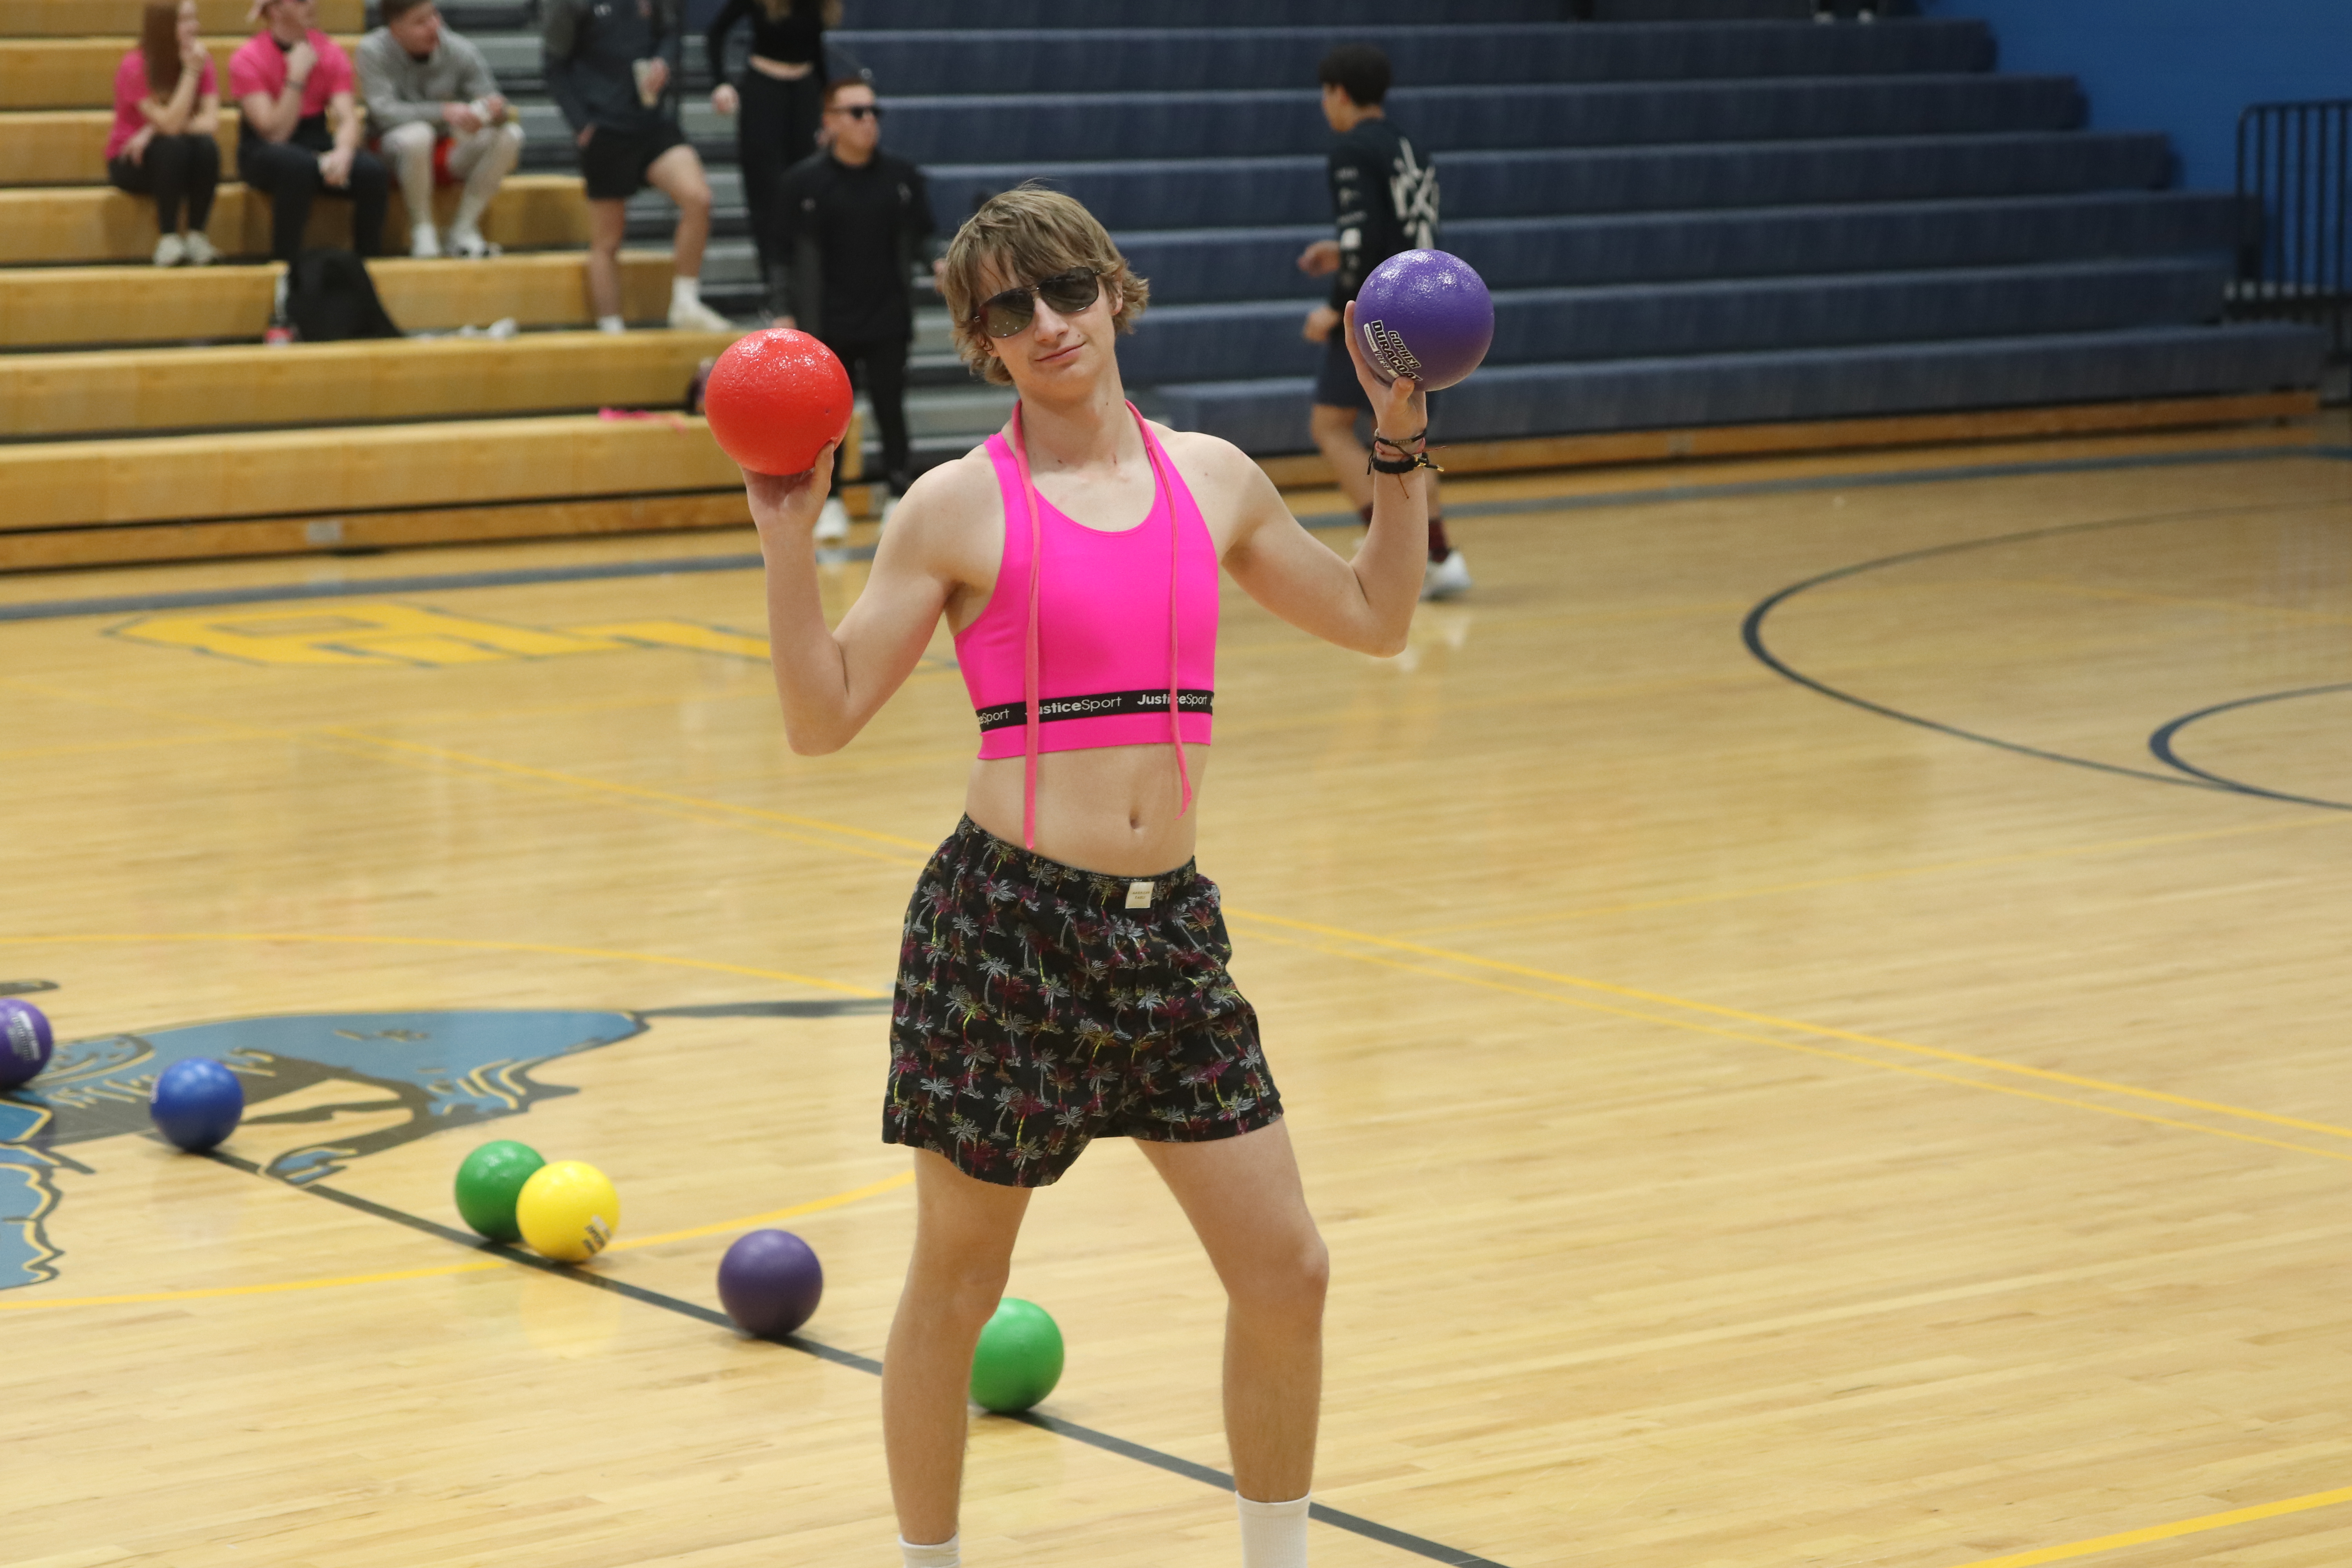 Senior Kaid Sanchez competes
in the dodgeball tournament. /
Kailey Franklin • The Brand